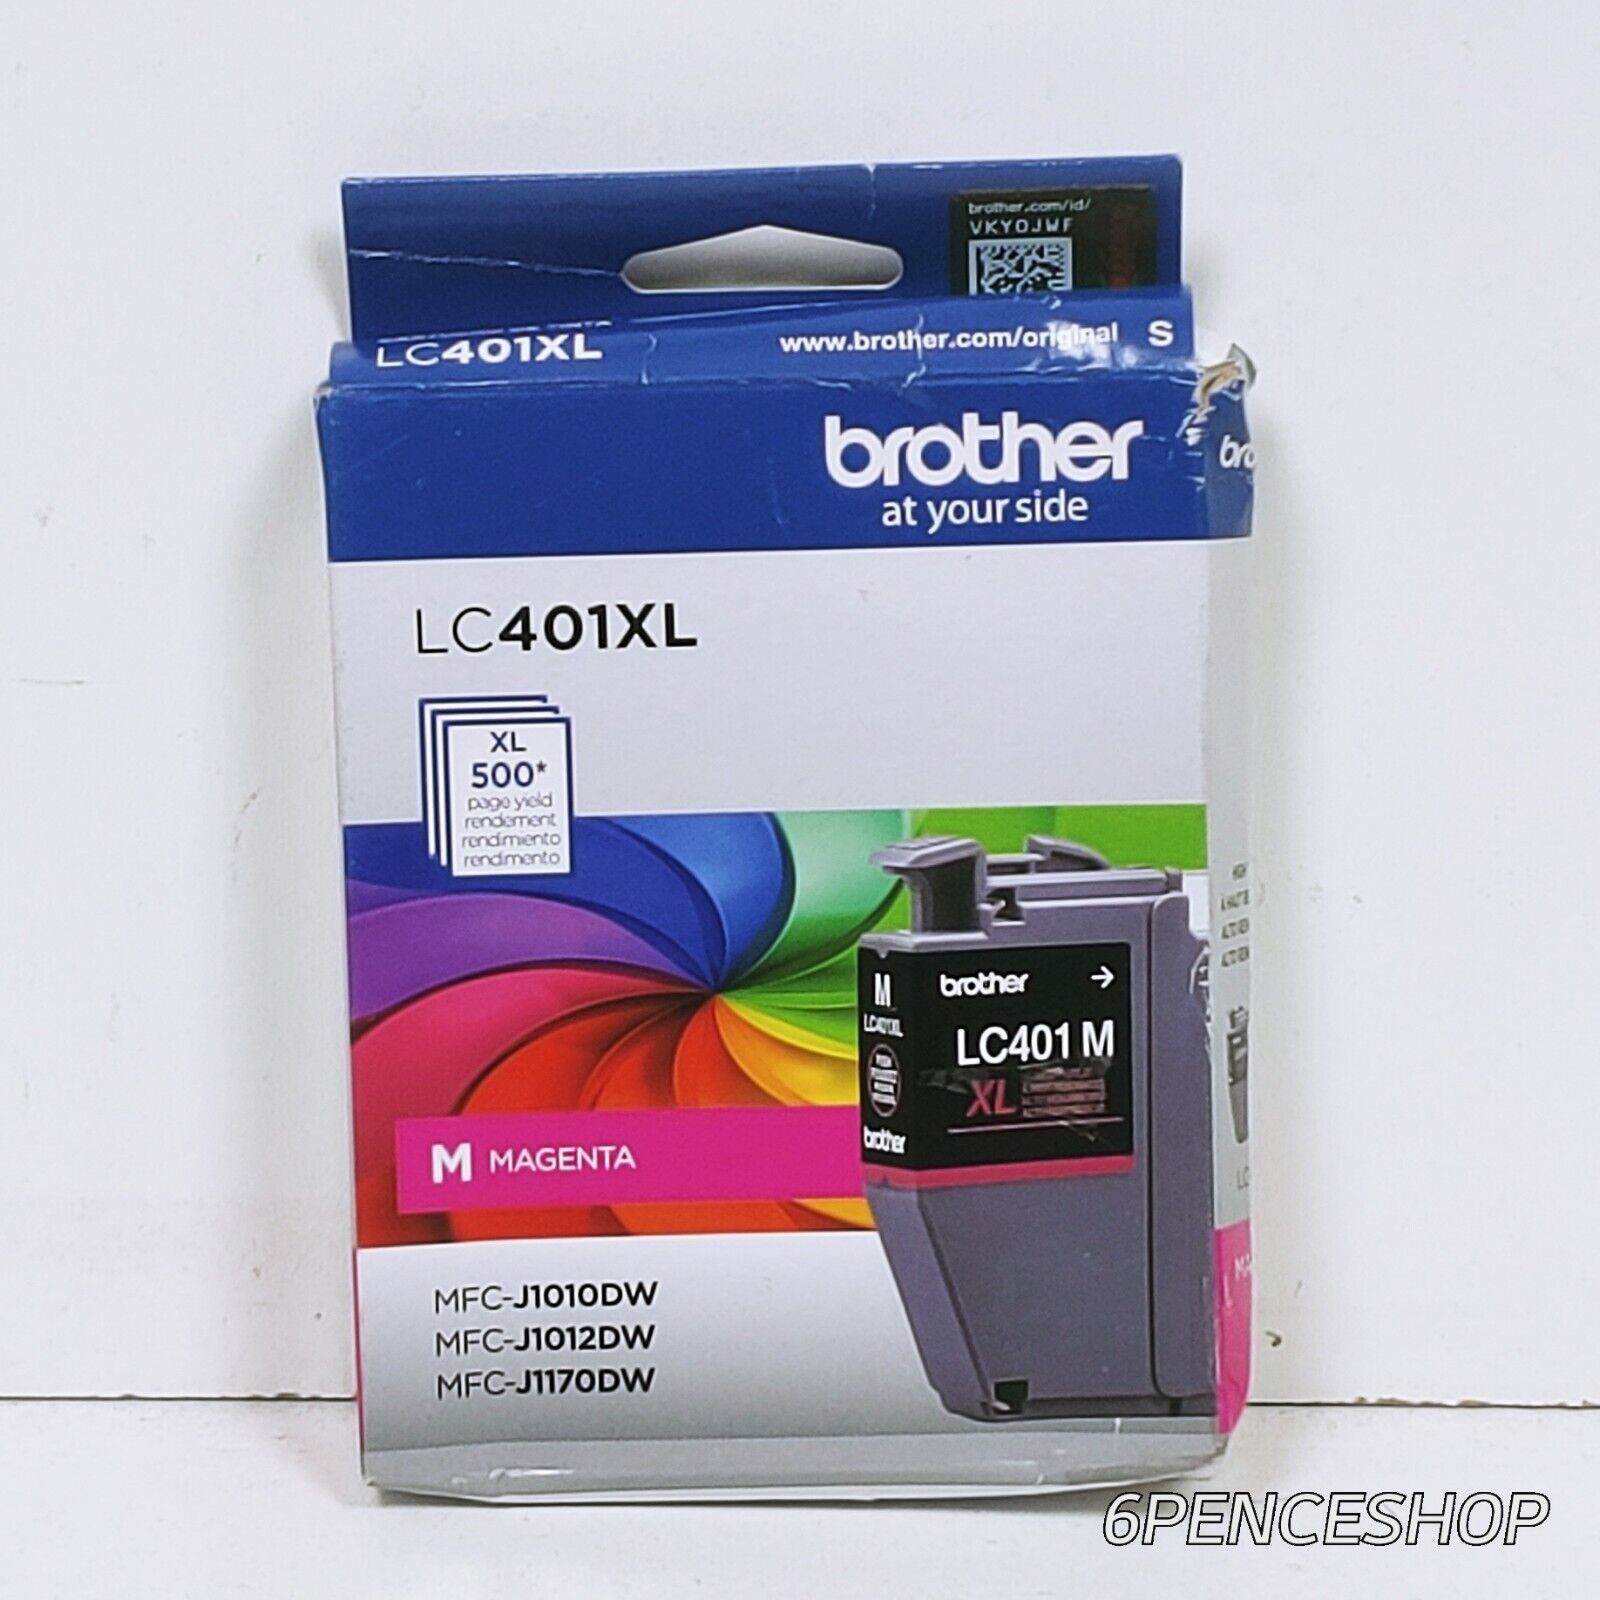 DEFORMED BOX NEW Brother LC401XL High Yield Magenta Ink Cartridge